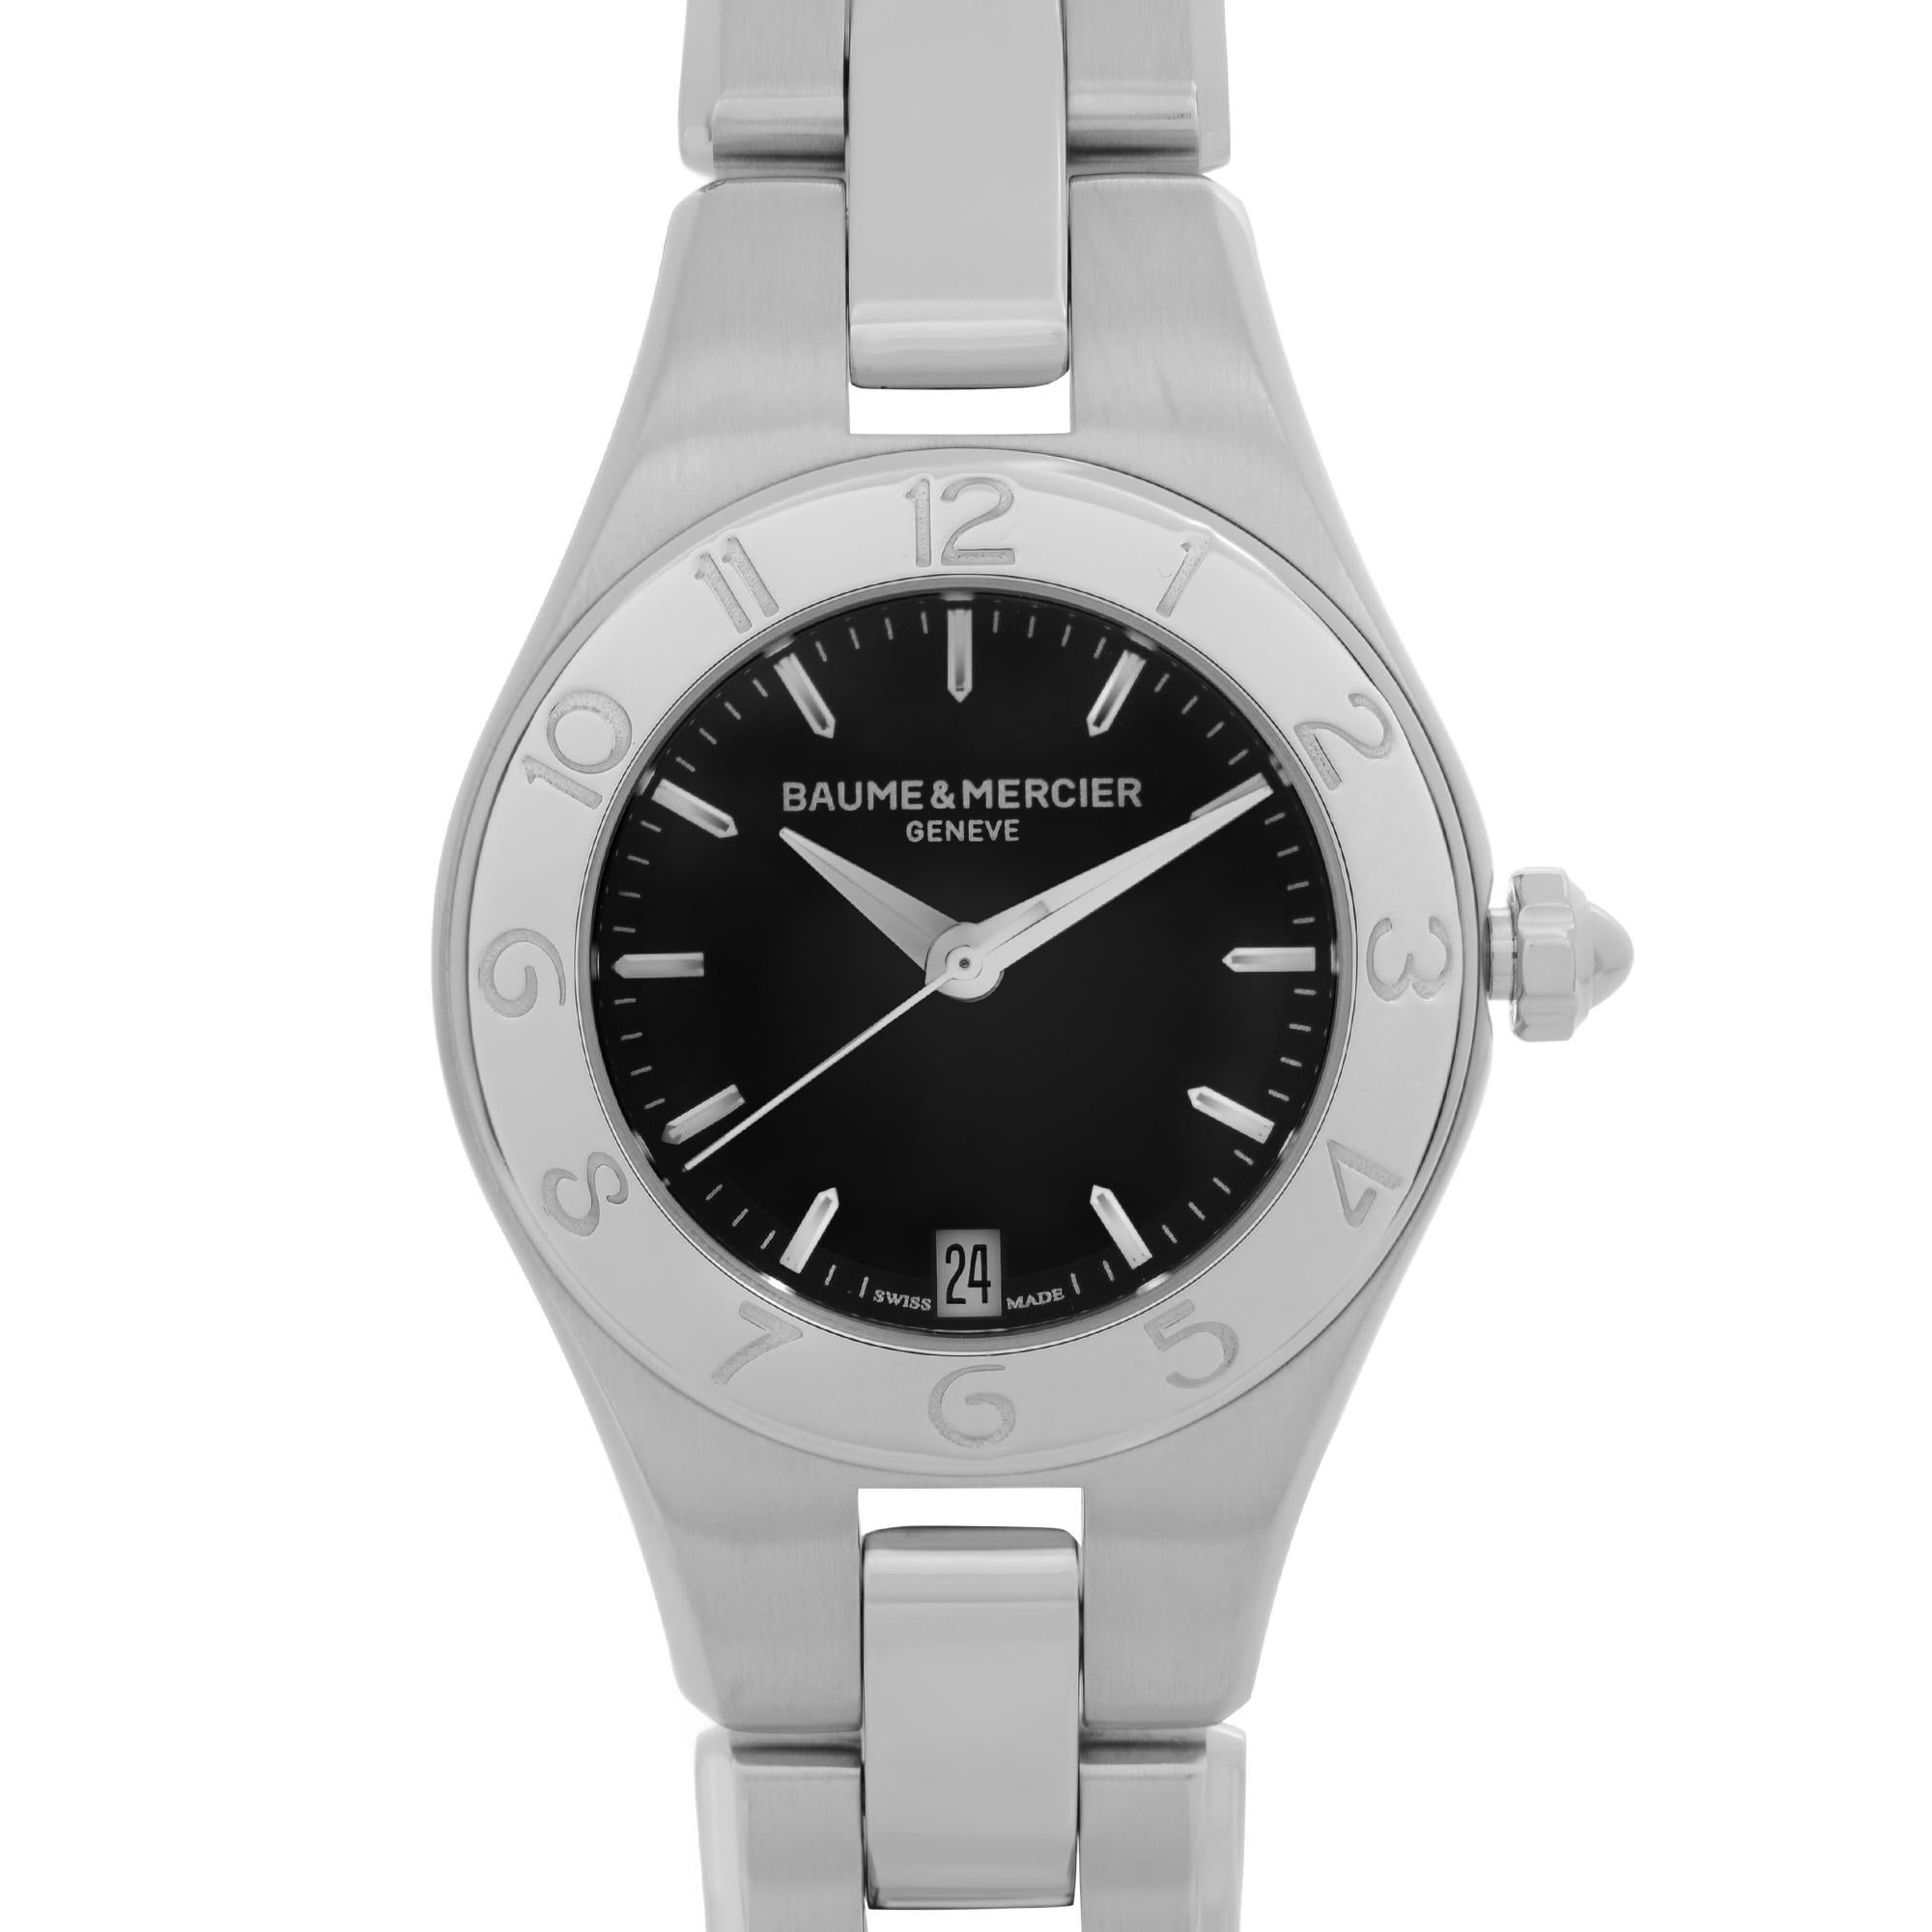 Pre Owned Baume et Mercier Linea 27mm Stainless Steel Black Dial Quartz Ladies Watch 10010. This Beautiful Timepiece is Powered by Quartz (Battery) Movement And Features: Round Stainless Steel Case, Bracelet and Bezel. Black Dial with Silver-Tone